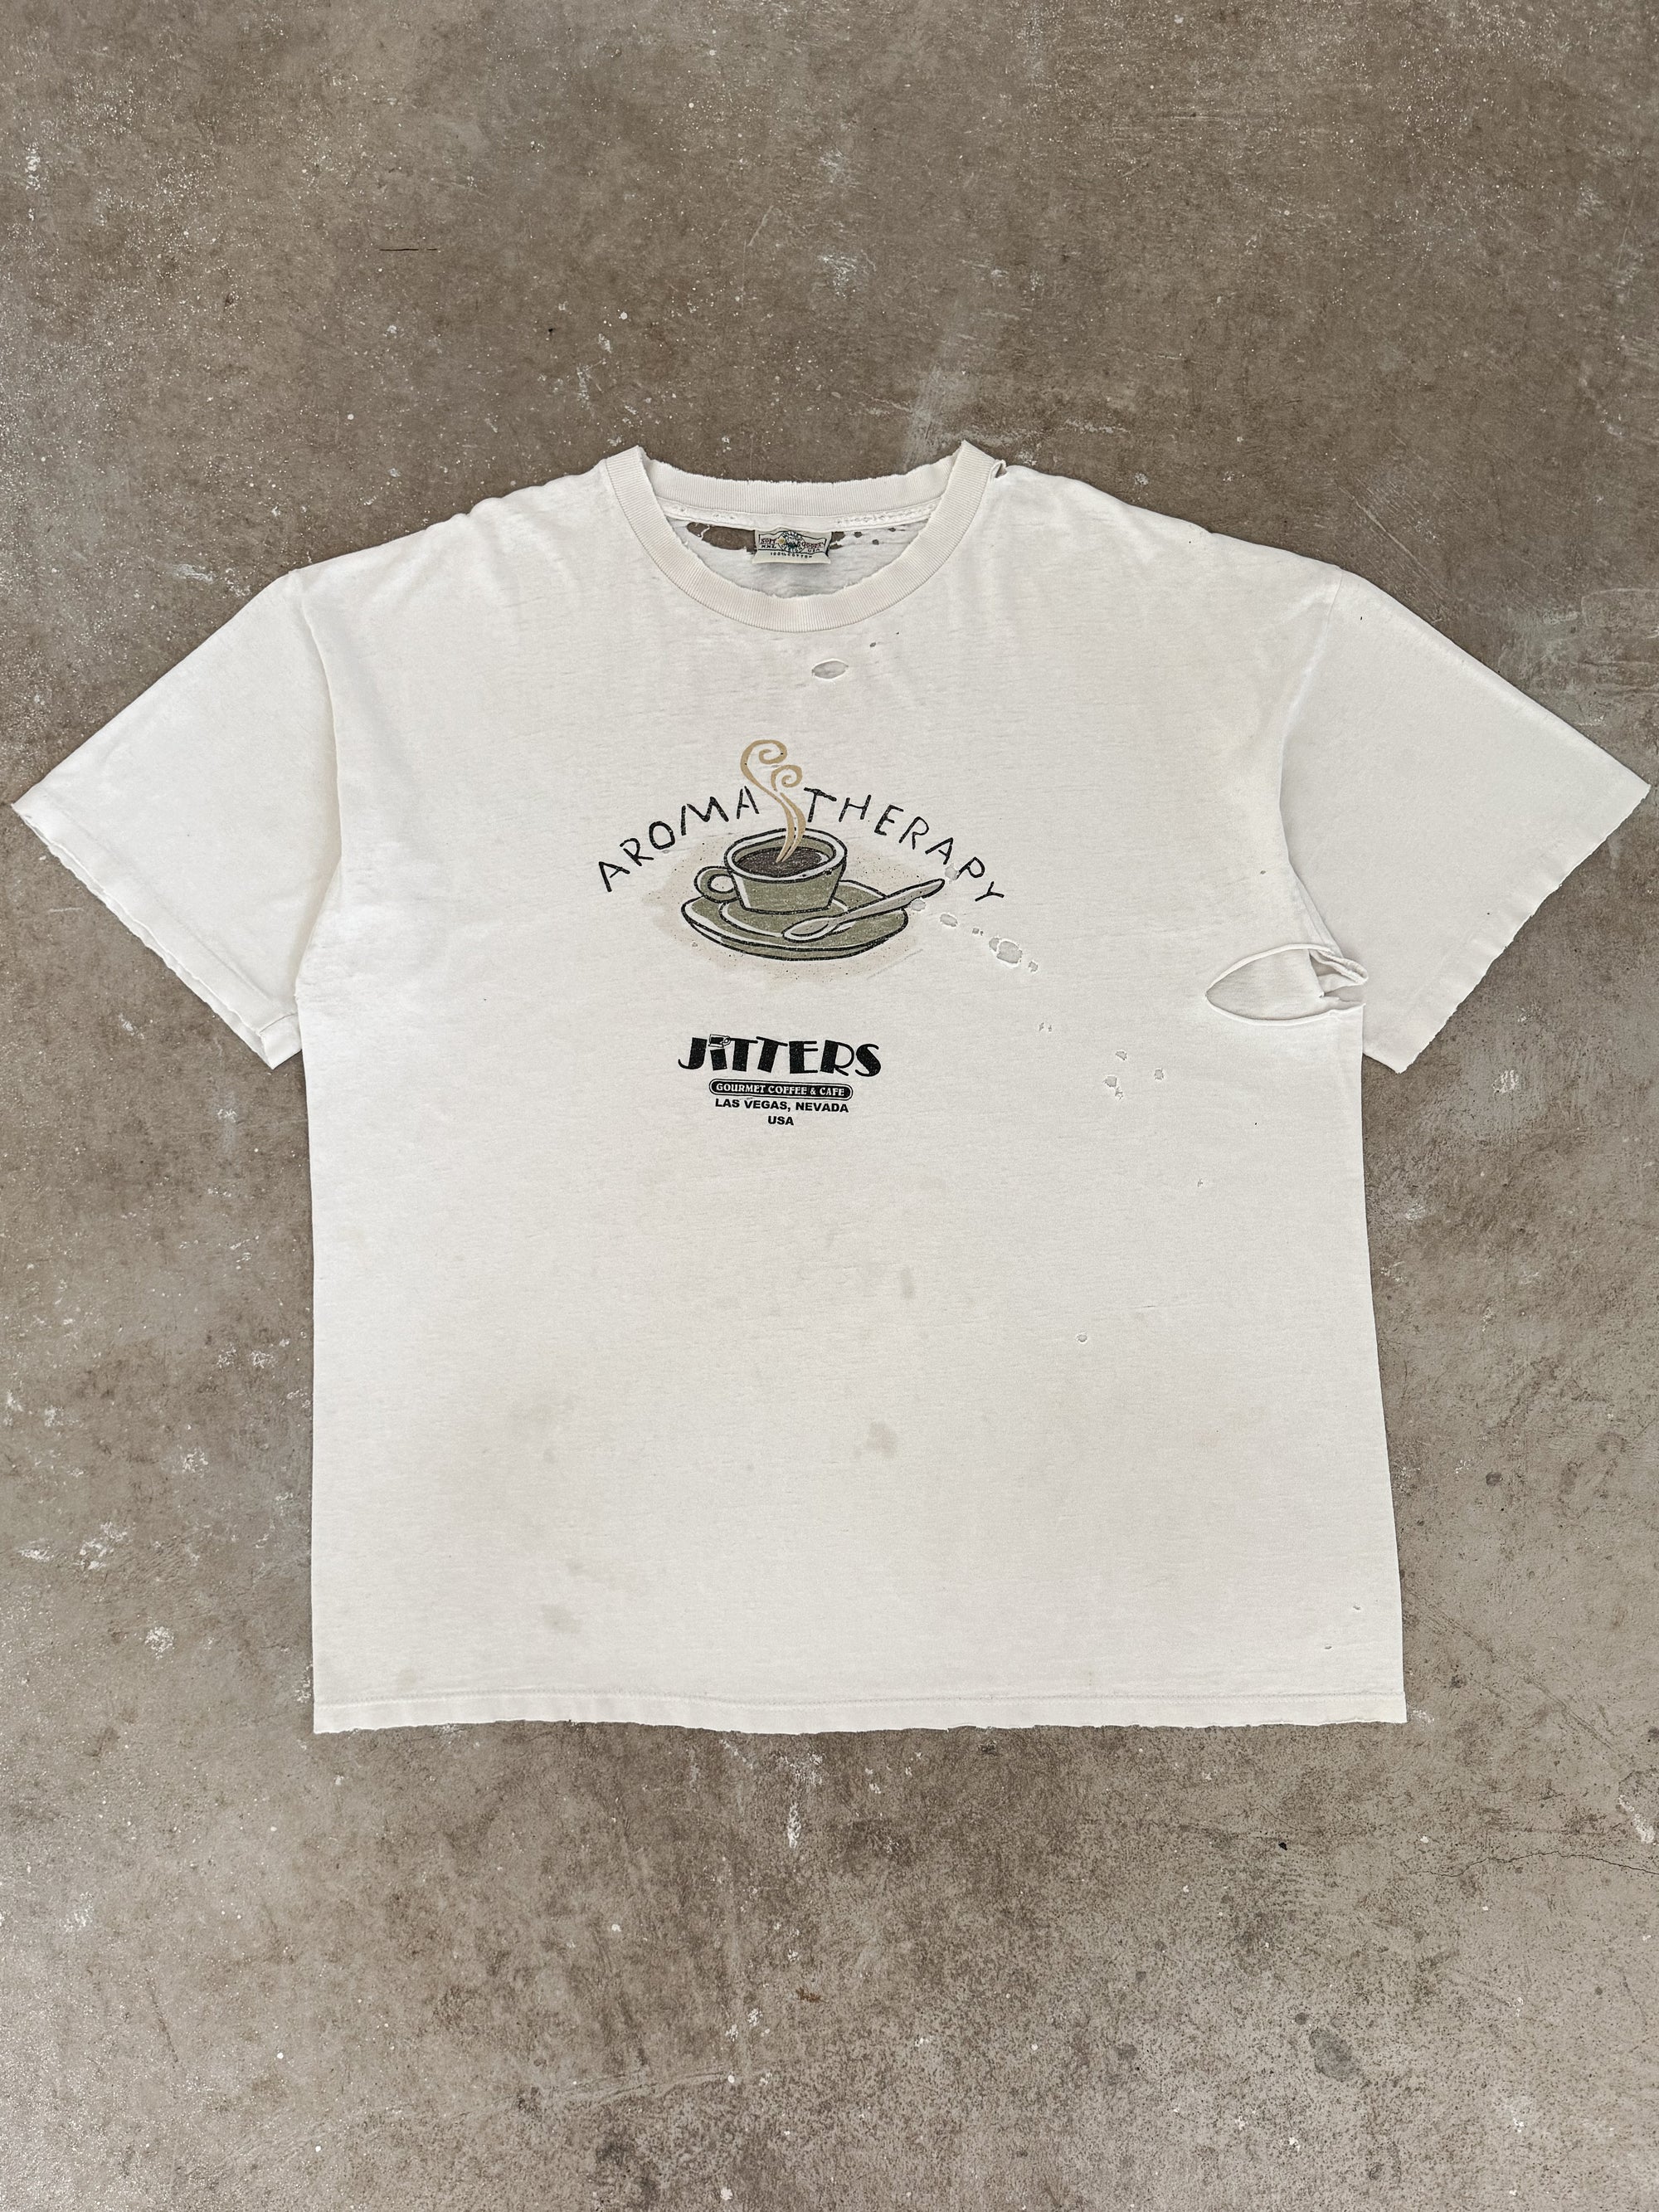 1990s "Aroma Therapy" Thrashed Tee (XXL)